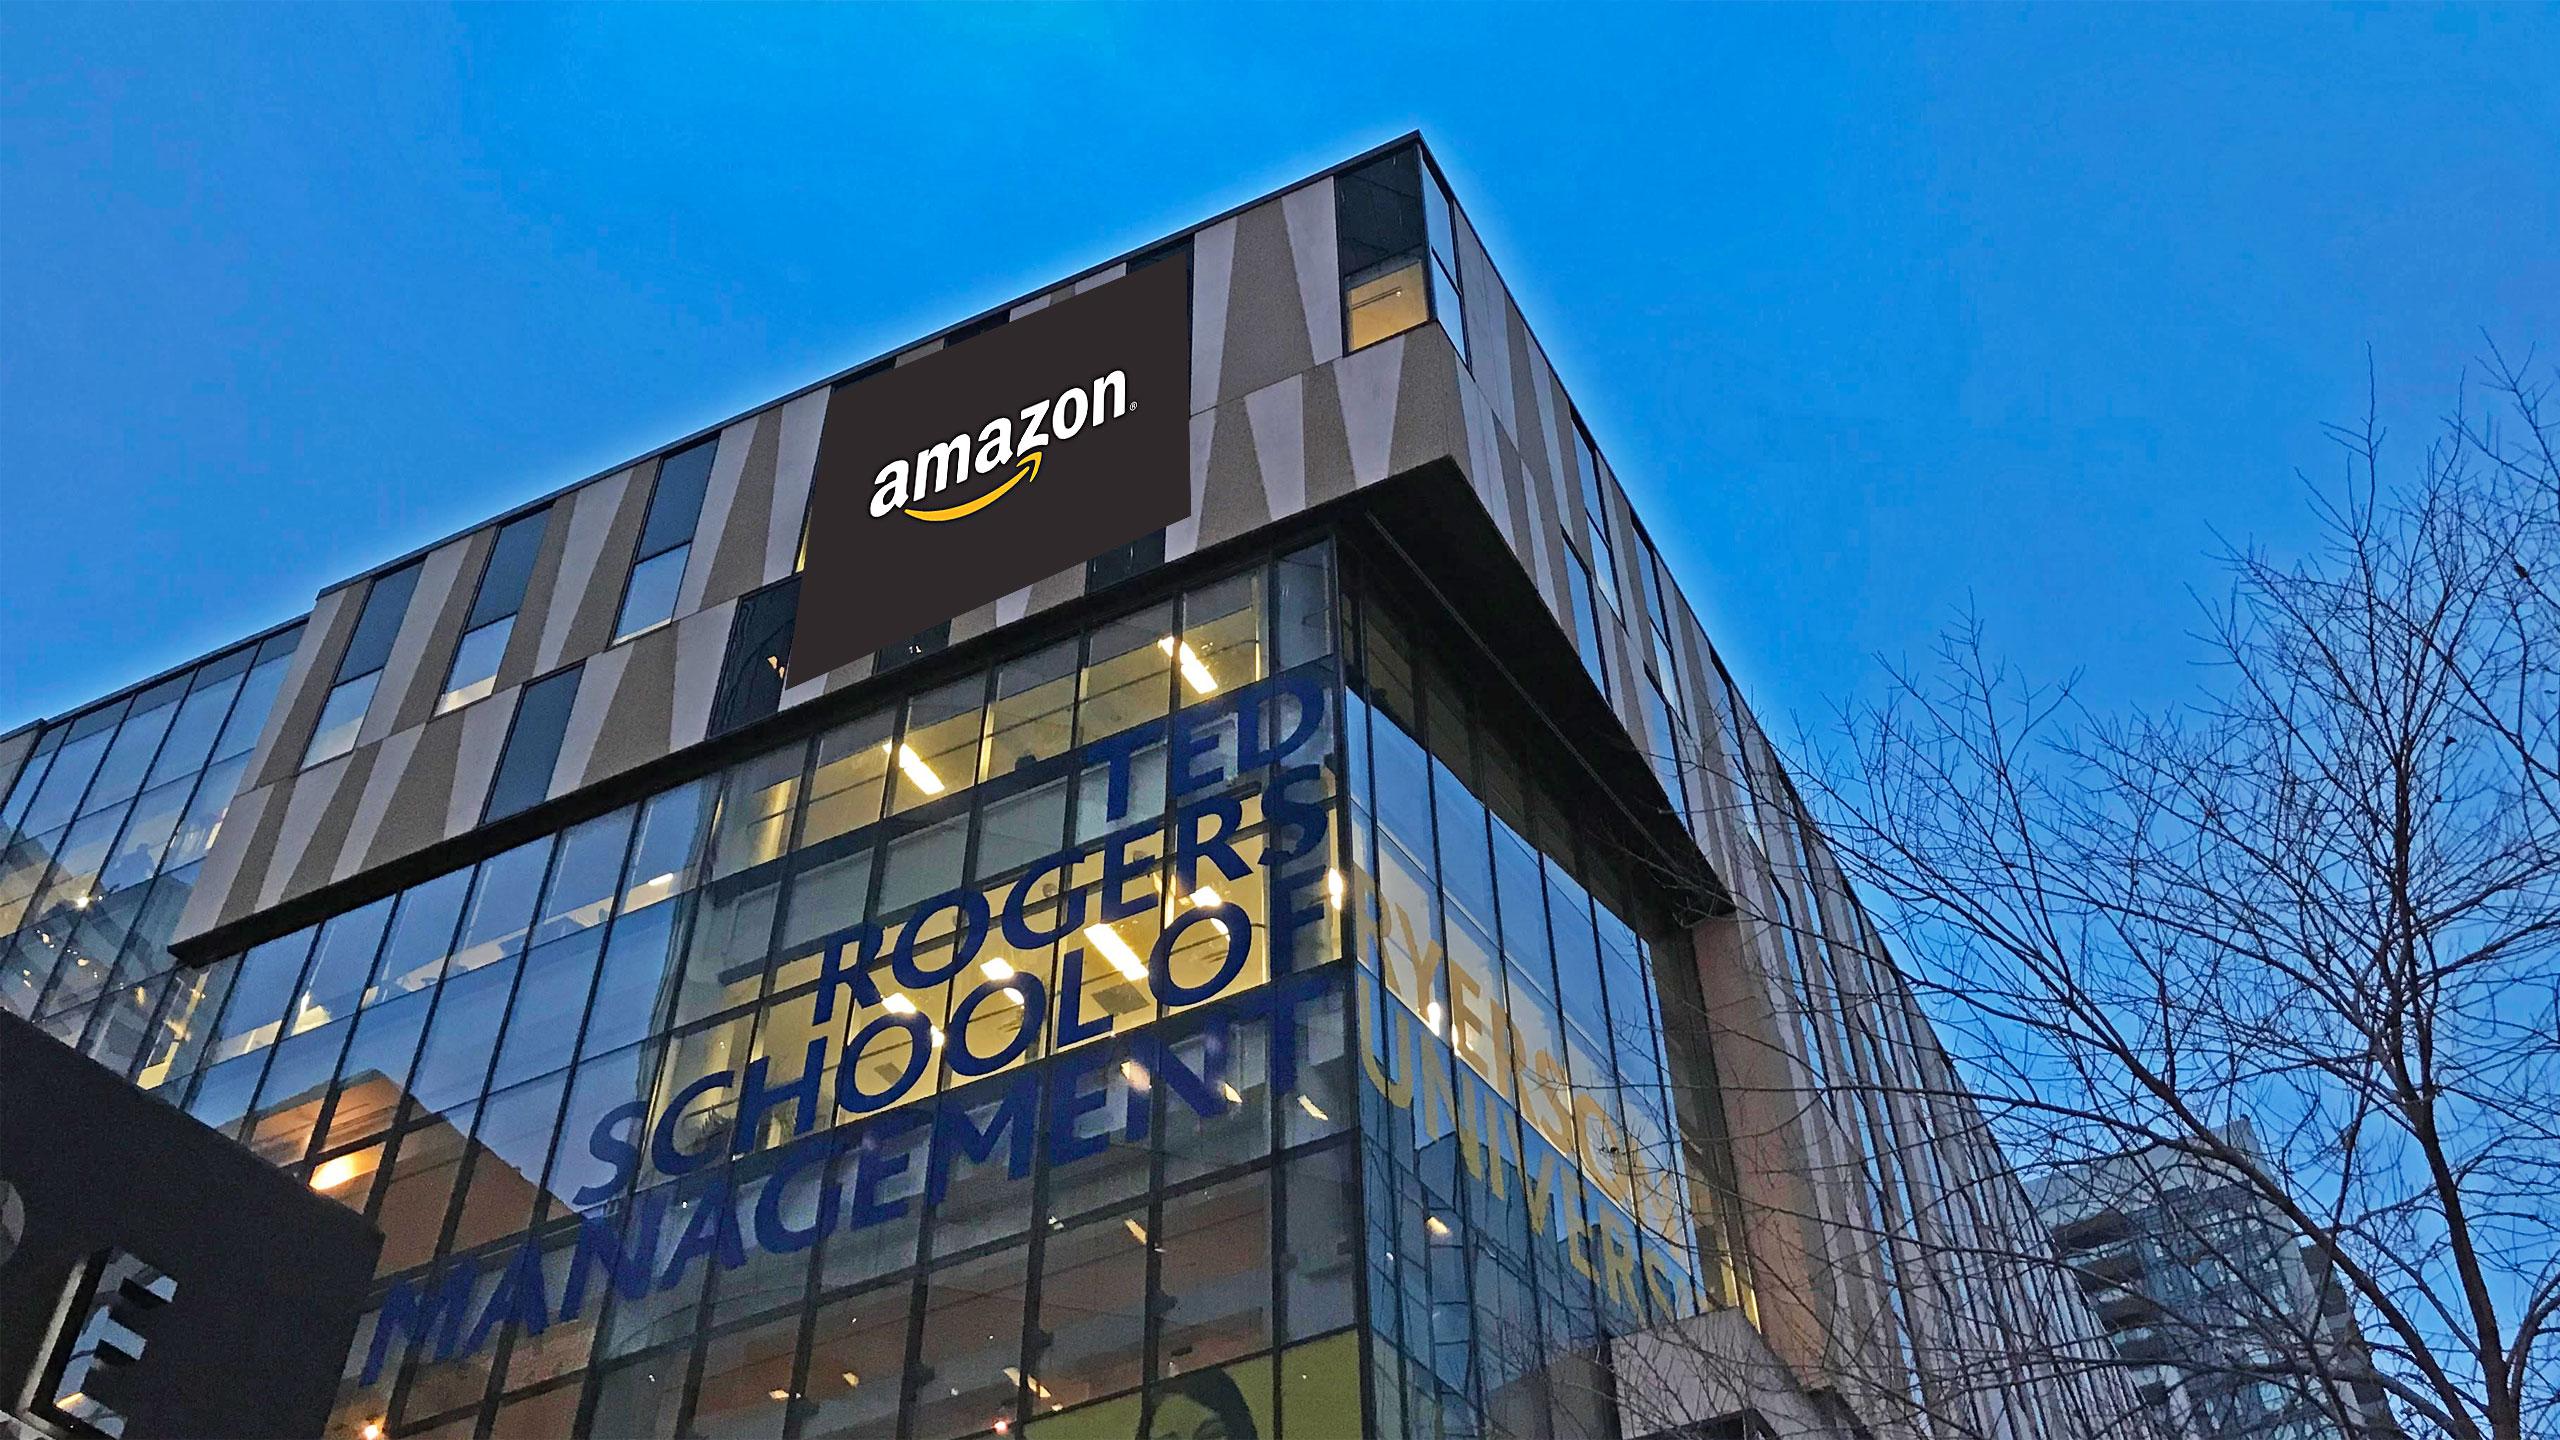 Amazon HQ2 in Toronto could drive up your rent - The Eyeopener